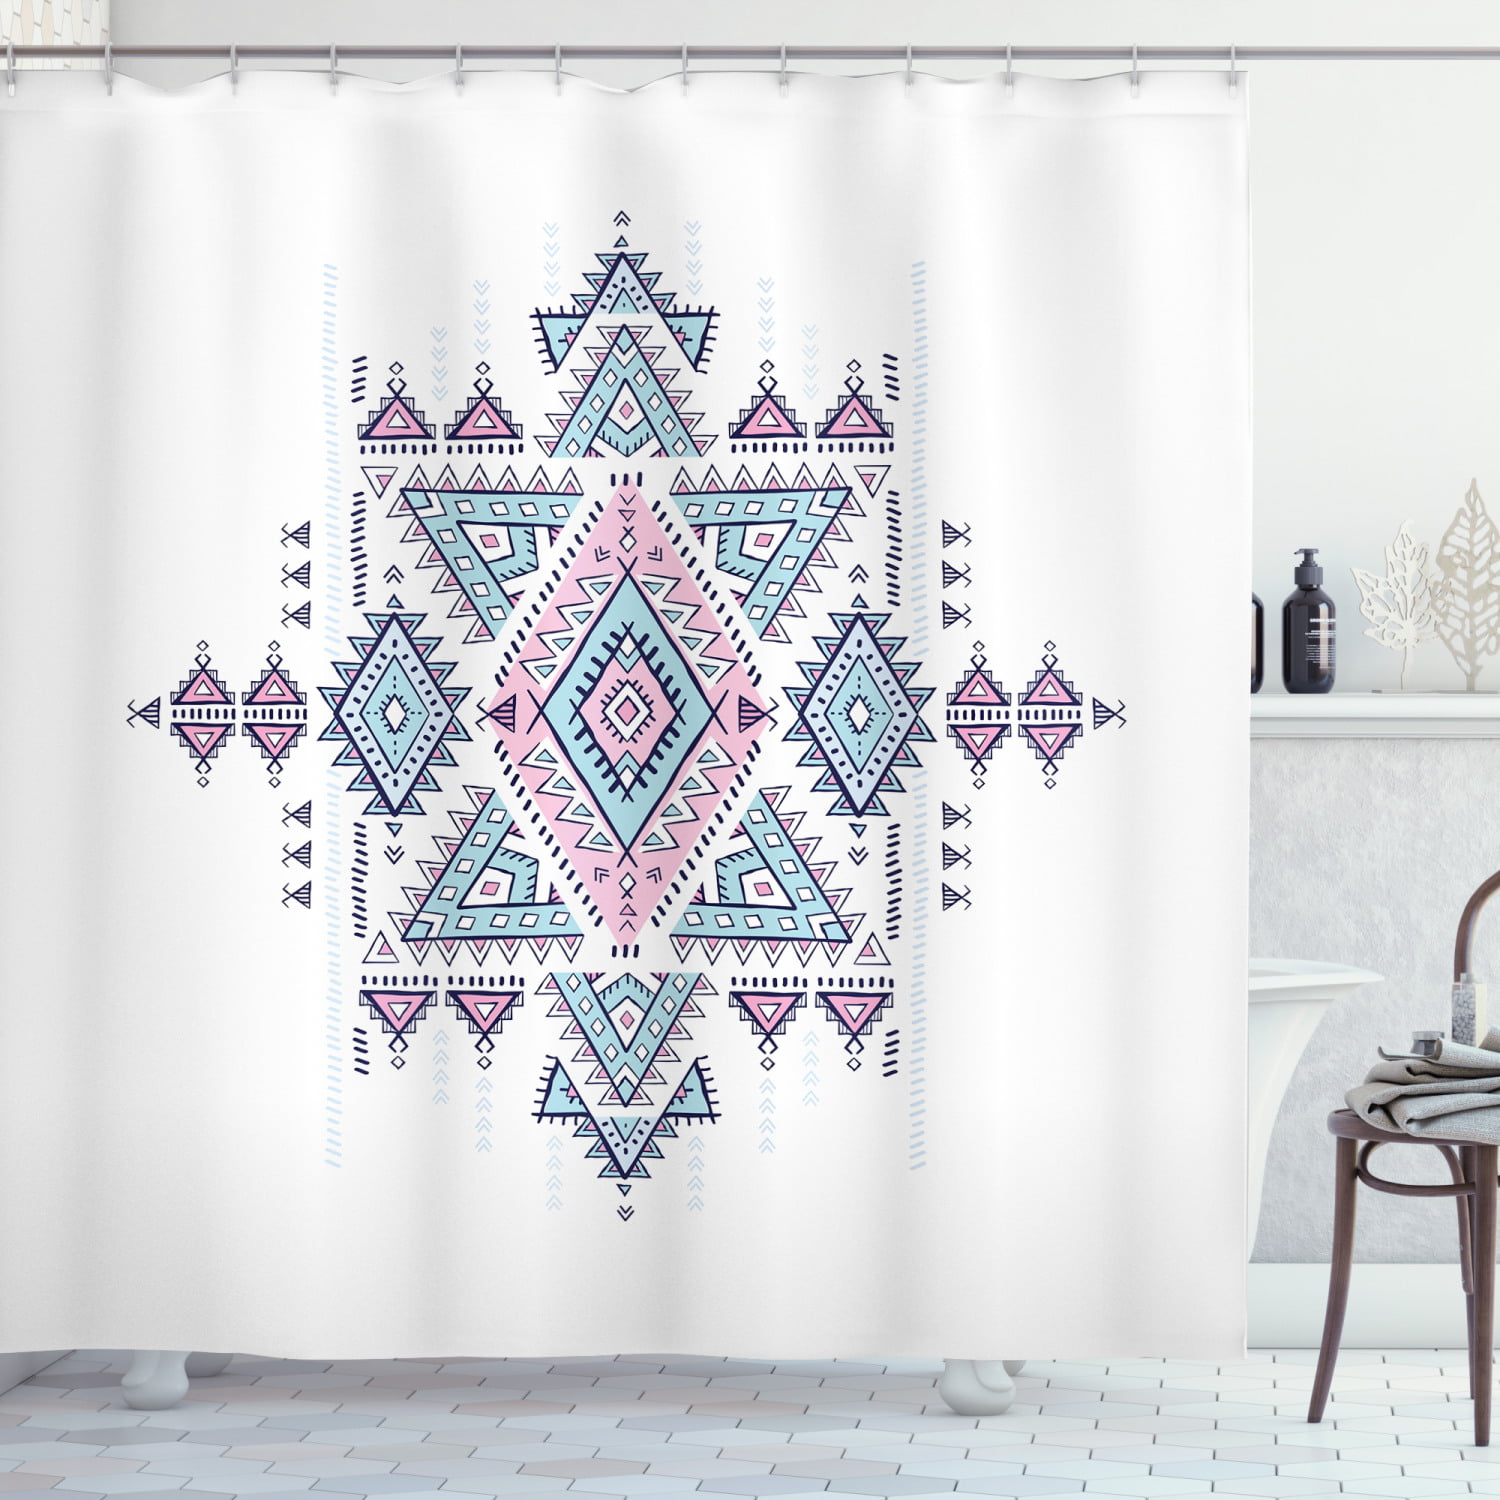 Aztec Shower Curtain, Geometric Pattern Folk Style Tattoo Inspired Design,  Fabric Bathroom Set with Hooks, 69W X 84L Inches Extra Long, Baby Blue Pale  Pink White Dark Violet Blue, by Ambesonne -